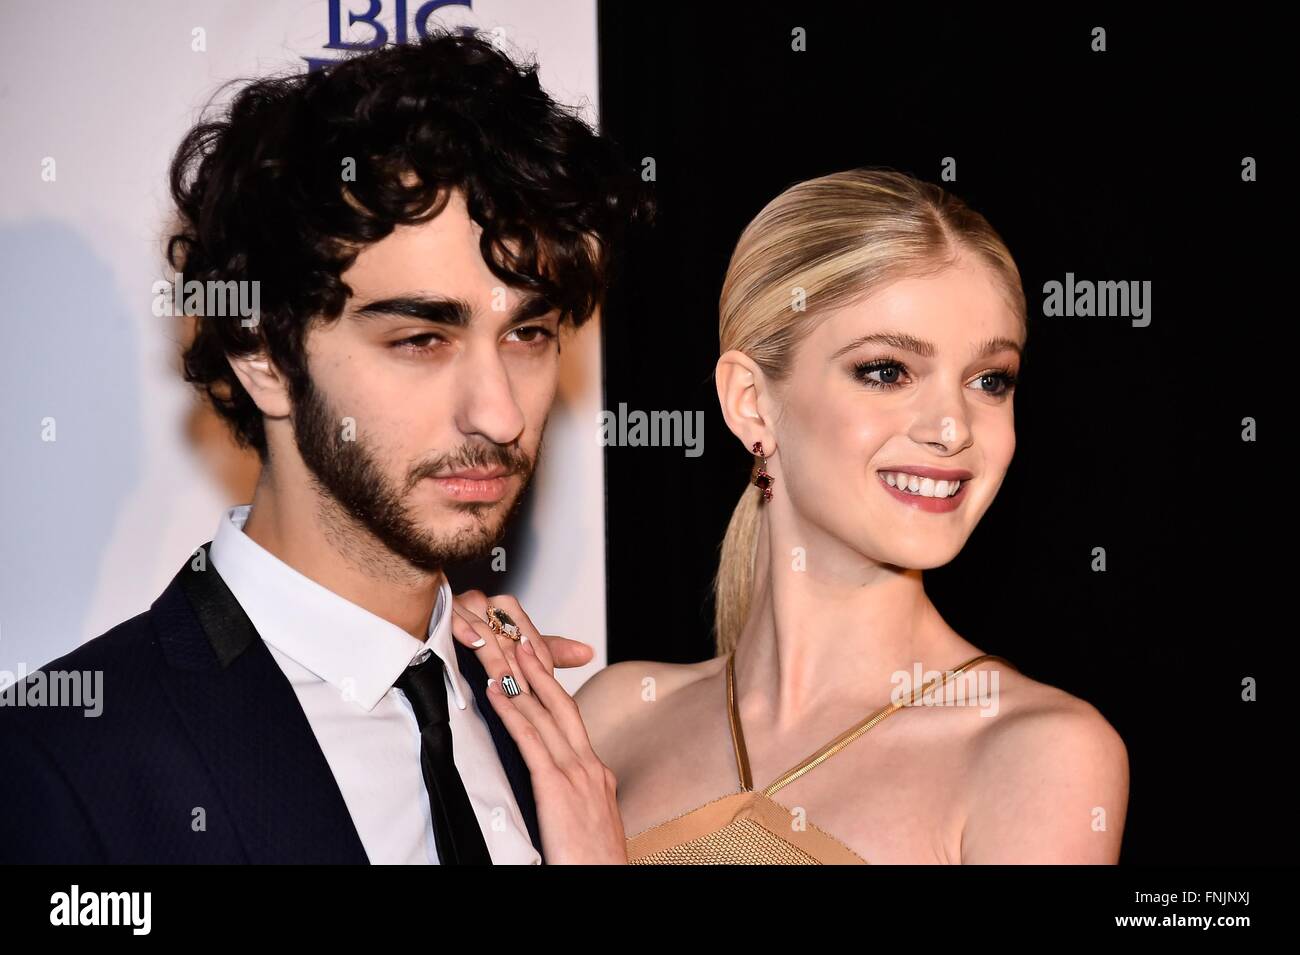 New York, NY, USA. 15th Mar, 2016. Alex Wolff, Elena Kampouris at arrivals for MY BIG FAT GREEK WEDDING 2 Premiere, AMC Loews Lincoln Sqaure, New York, NY March 15, 2016. Credit:  Steven Ferdman/Everett Collection/Alamy Live News Stock Photo